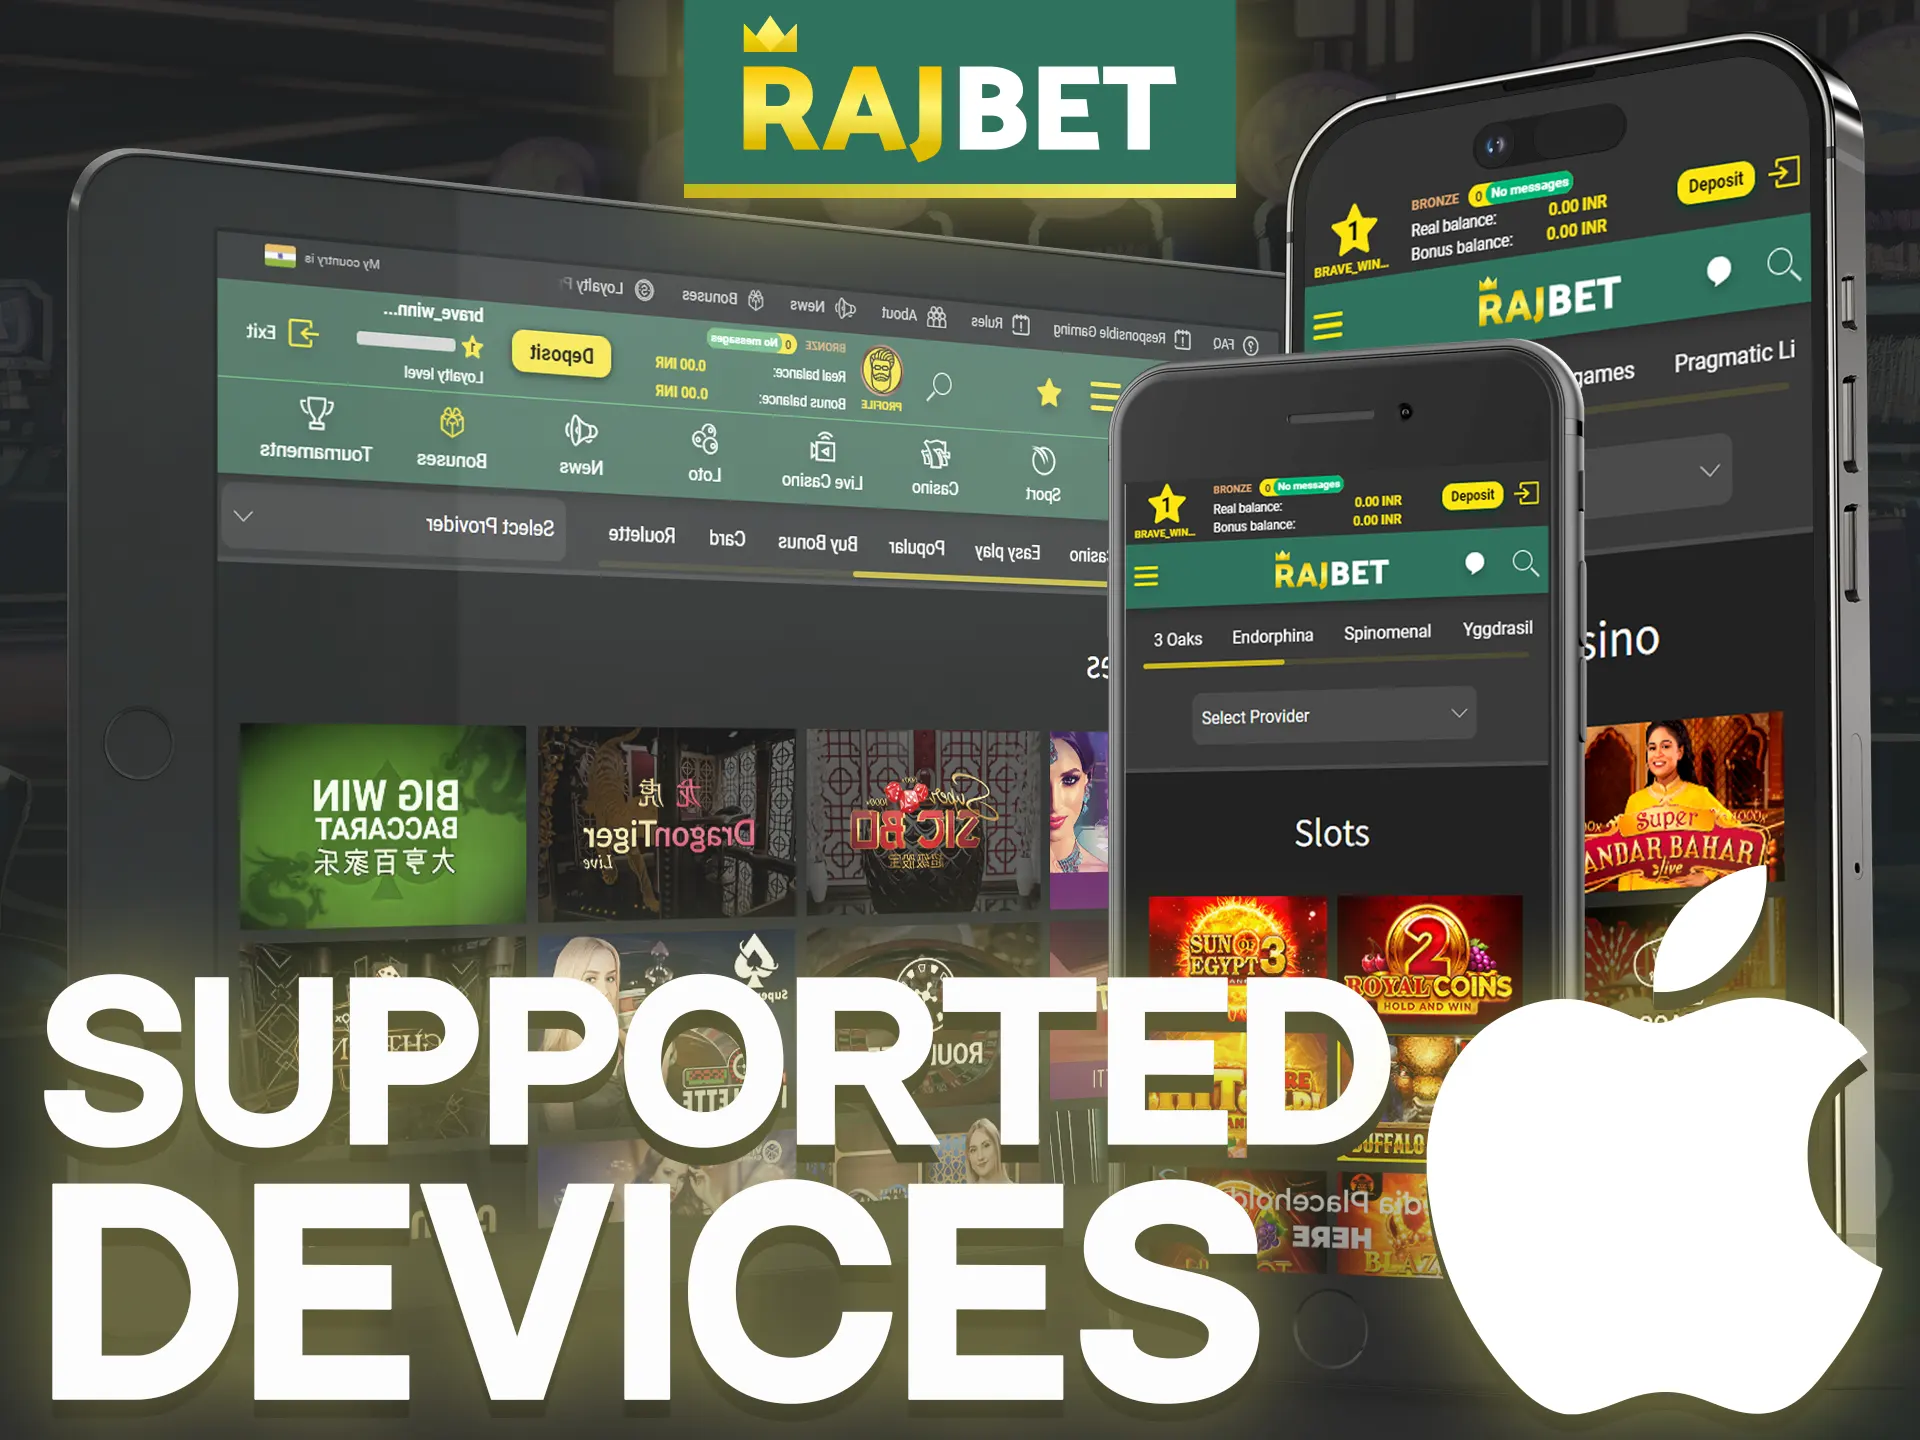 Install the Rajbet mobile app on your iOS mobile device.